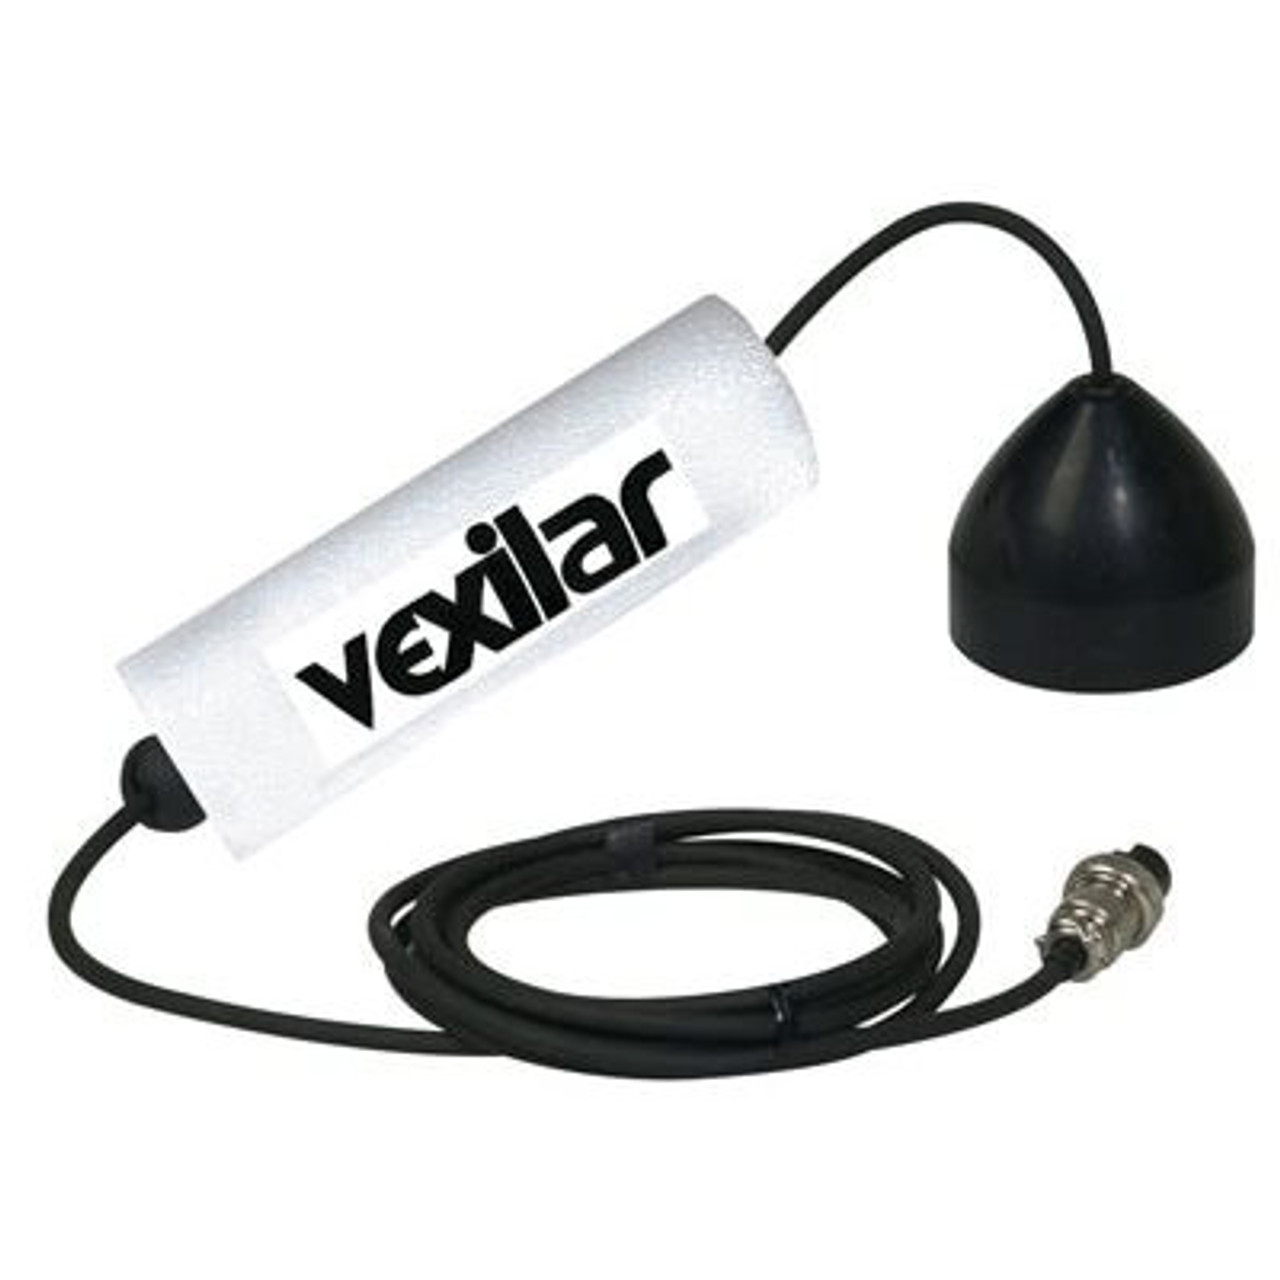 Pro-View Ice-Ducer Transducer TB0051 by Vexilar